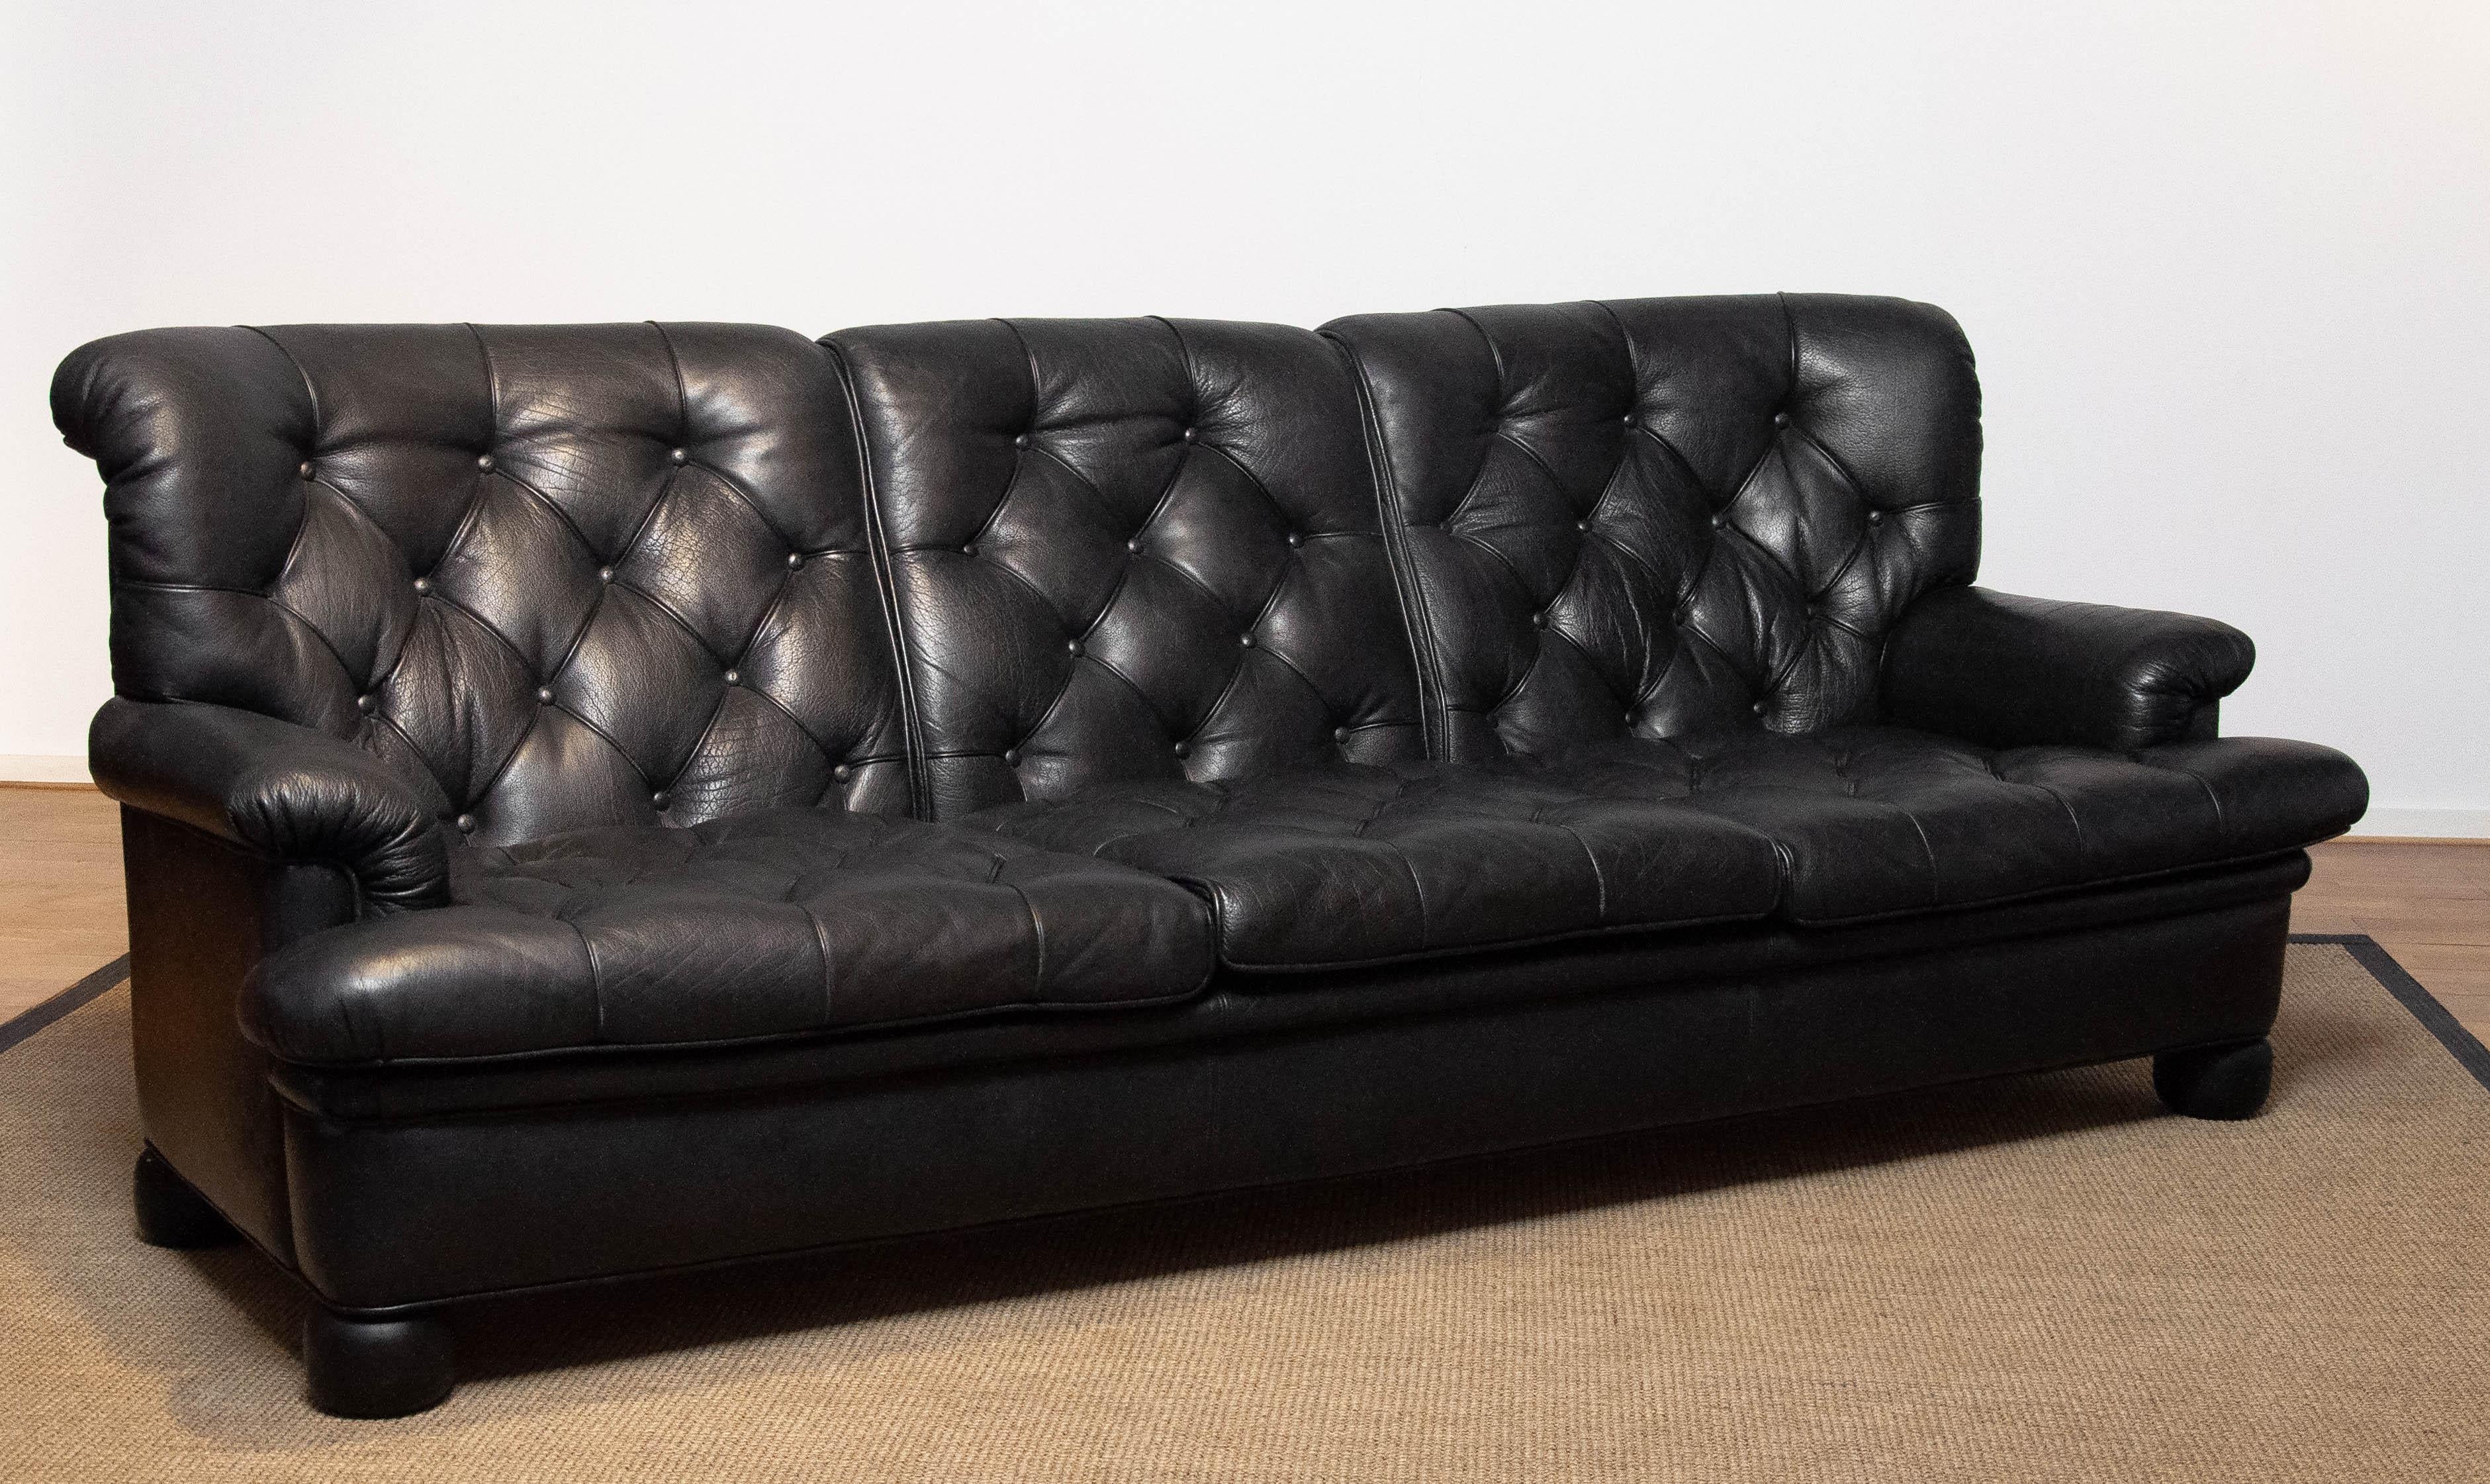 1960 Black Leather Chesterfield Model 'Jupiter' Three Seater Sofa by Arne Norell For Sale 1